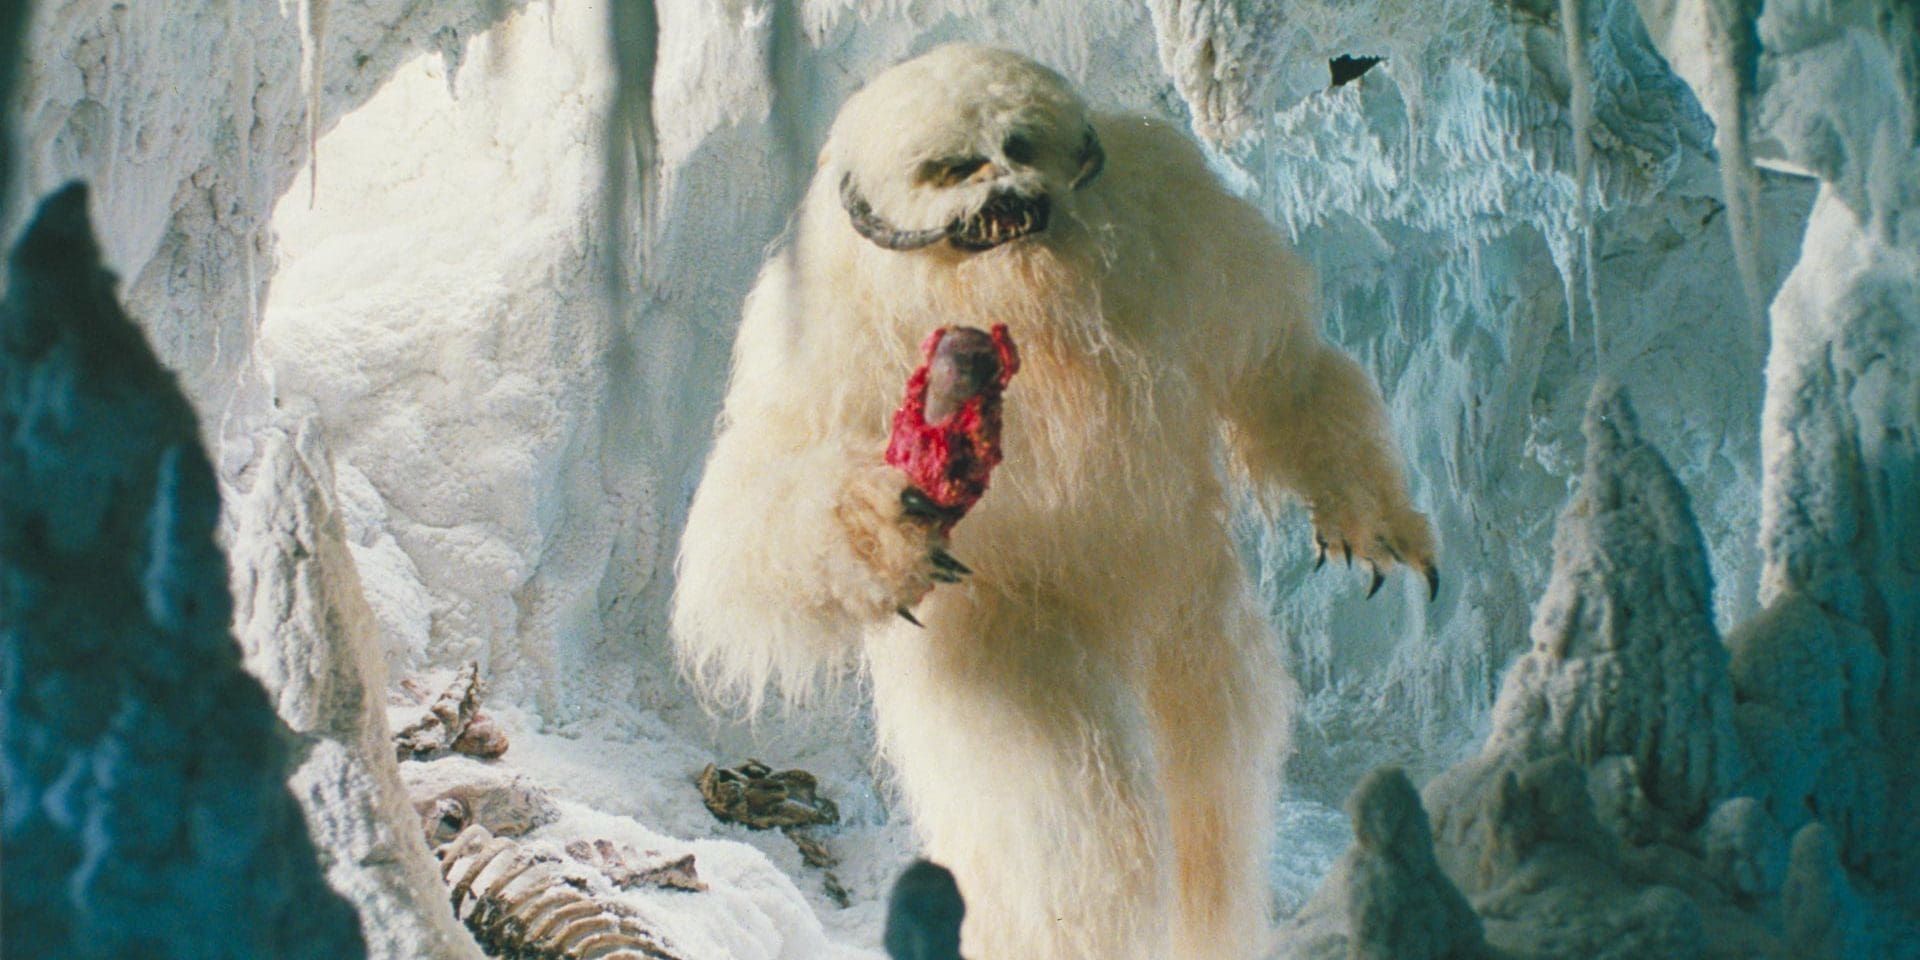 The wampa in its cave in The Empire Strikes Back